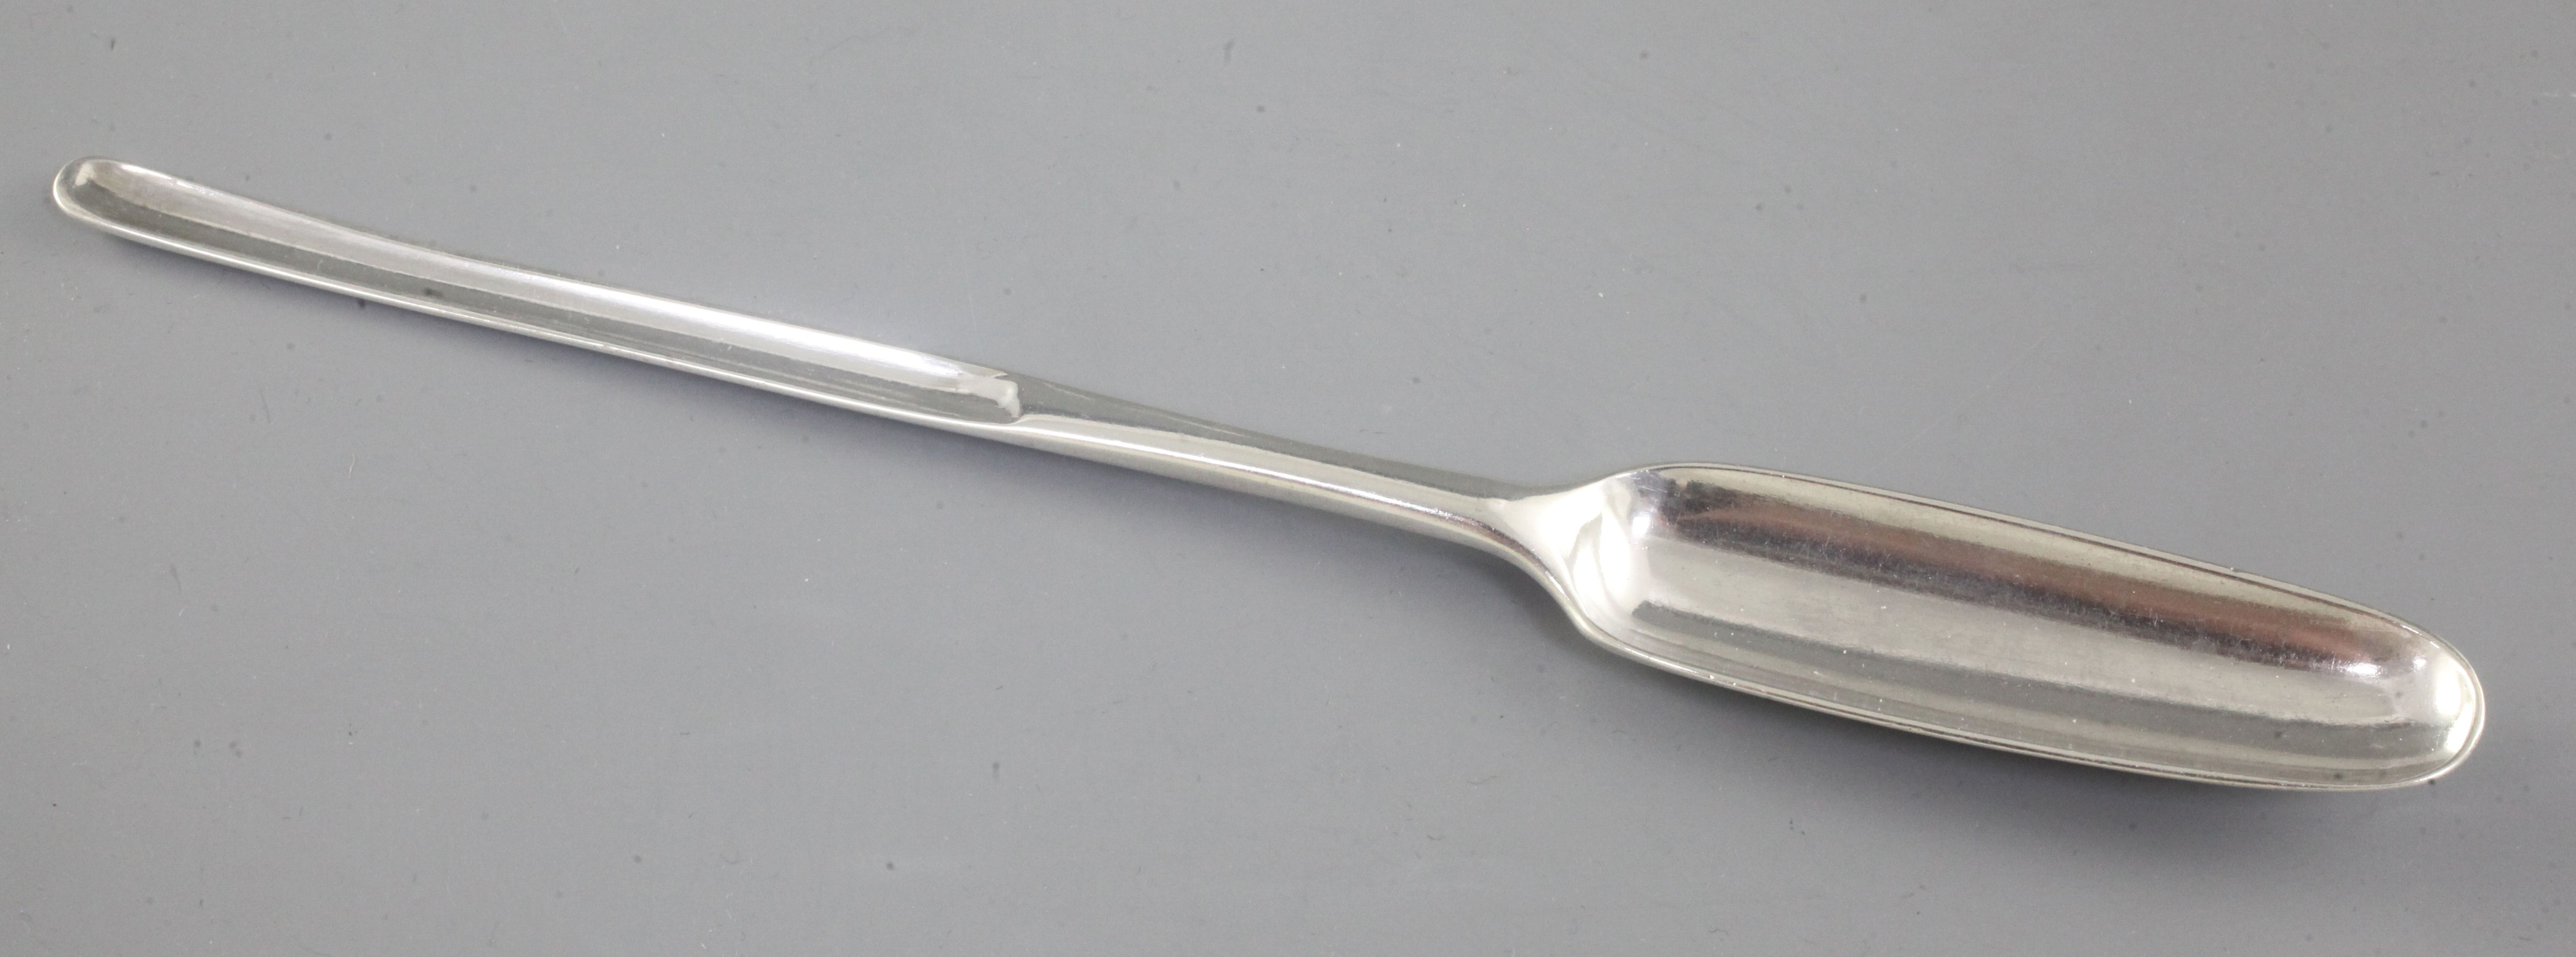 A George II silver marrow scoop, by Roger Hare, hallmarked London 1752, bearing an unusual